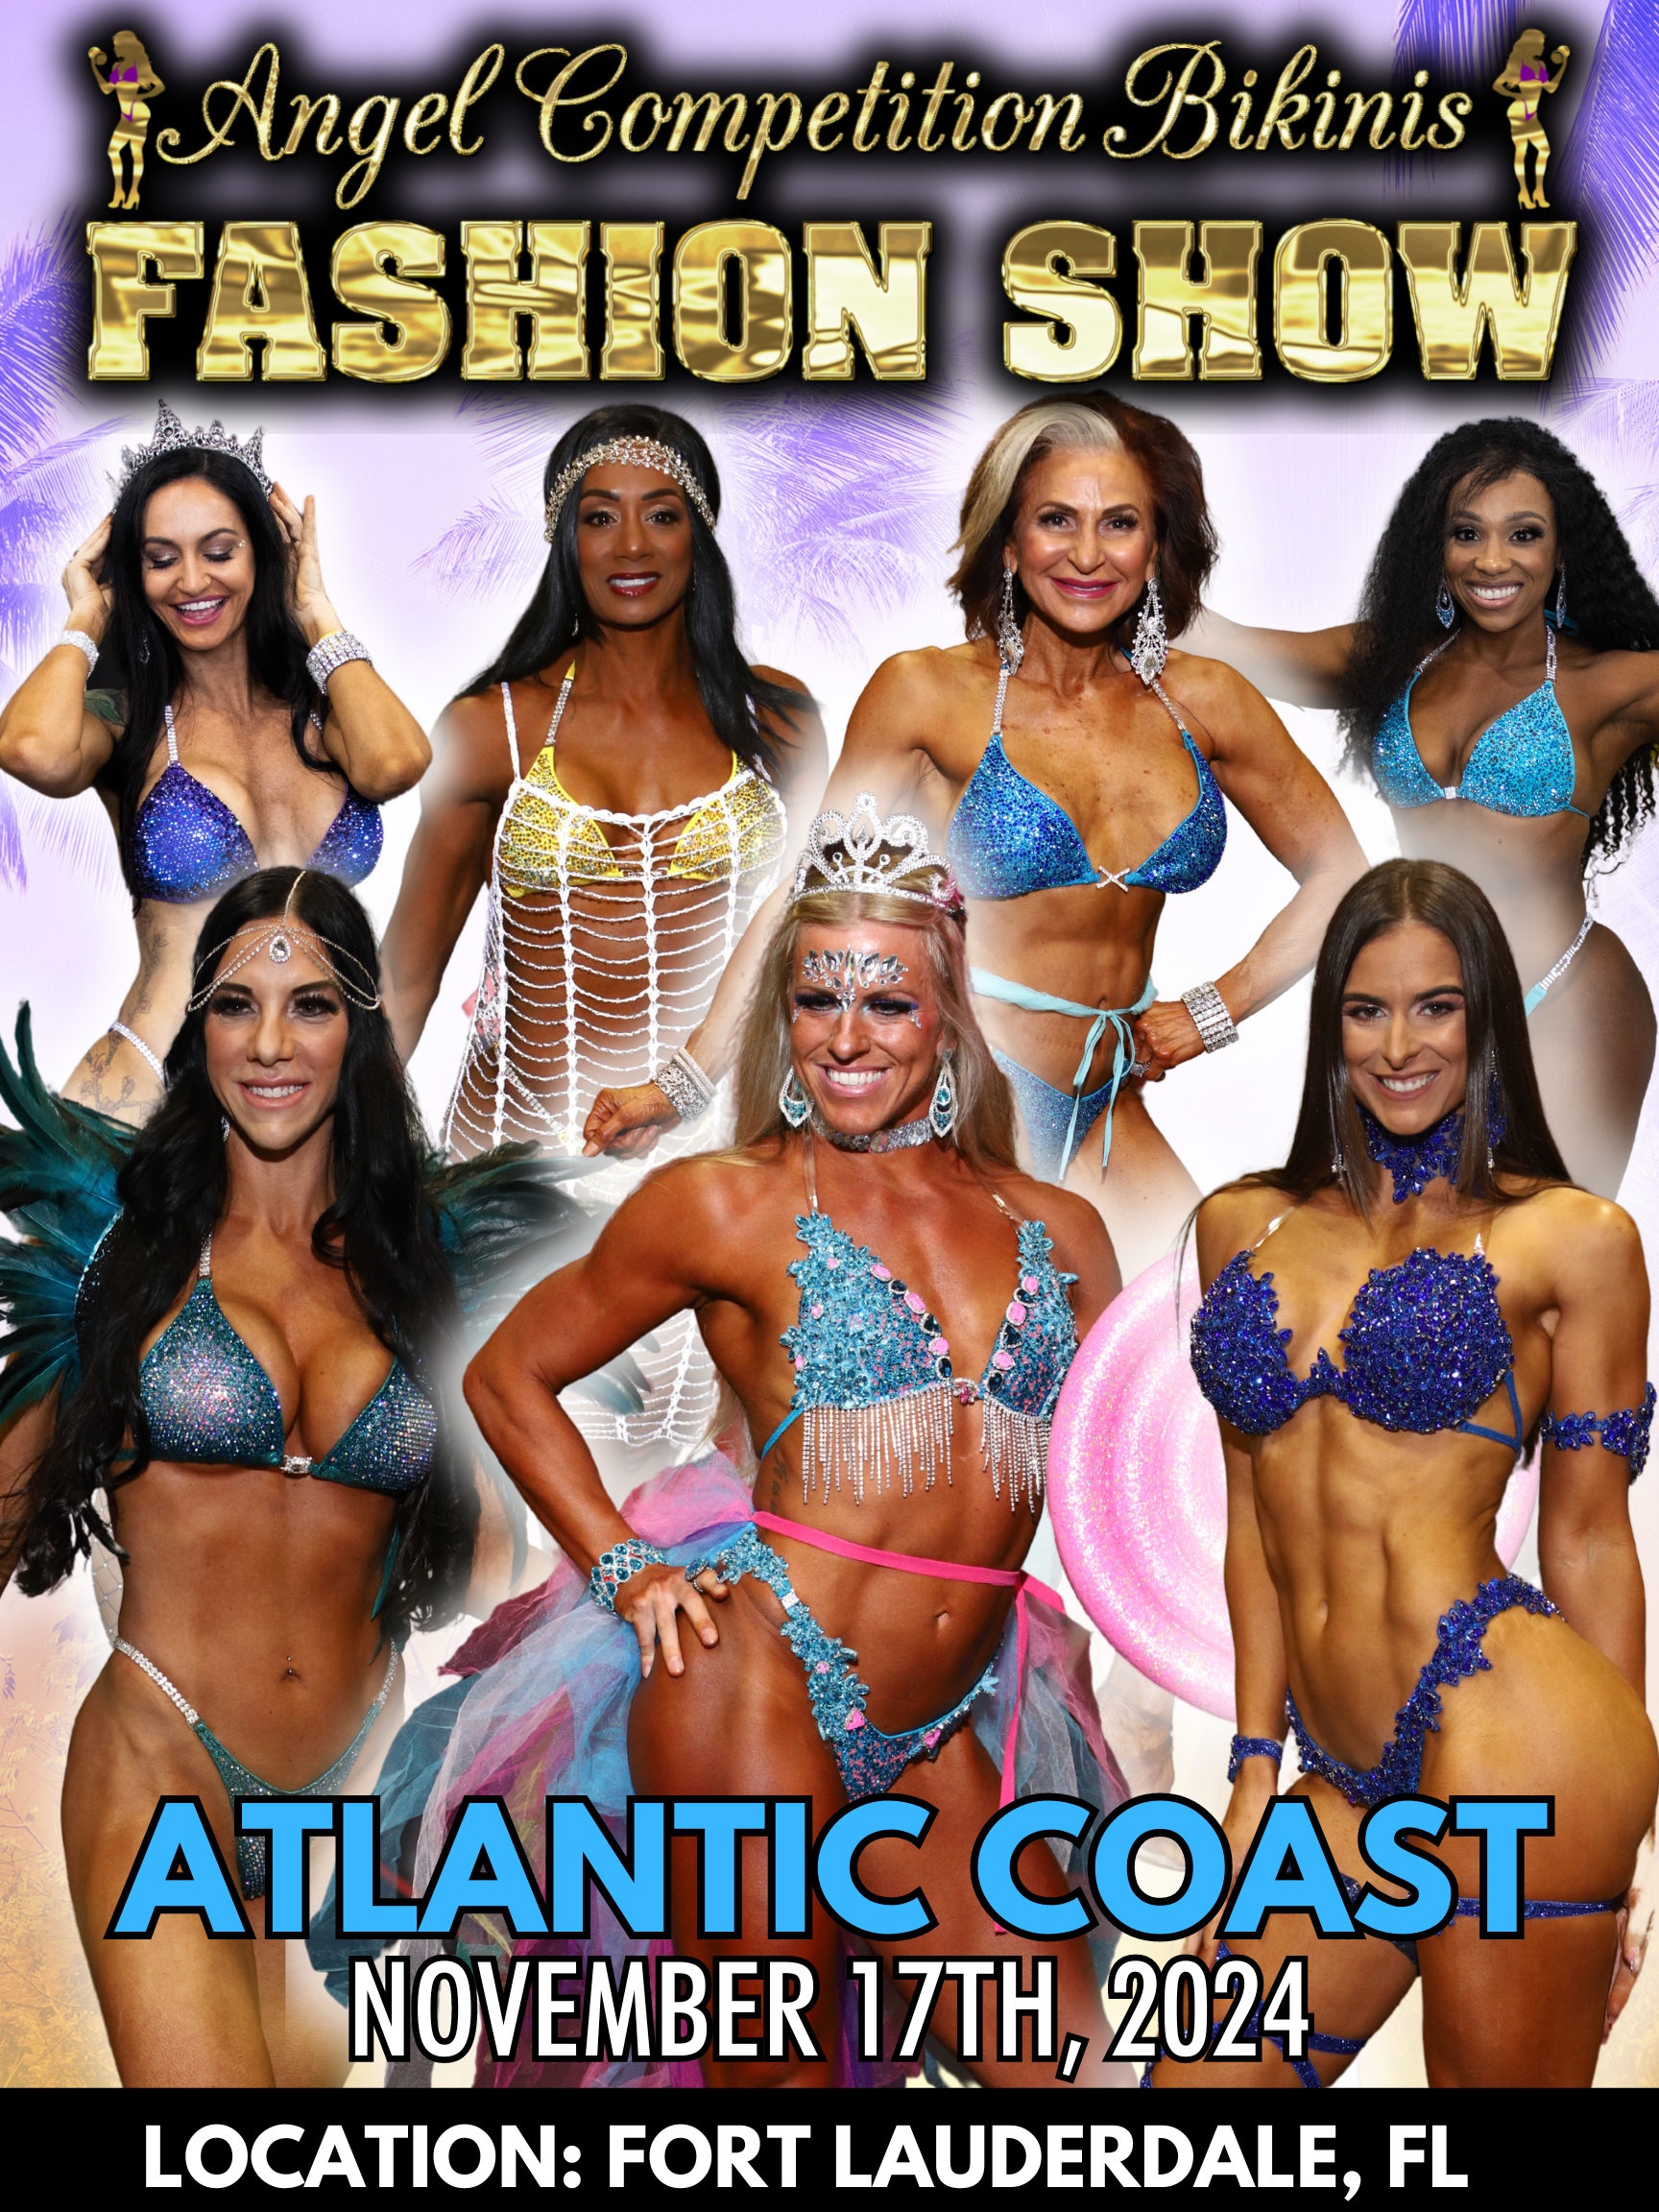 All Angel Fashion Show Posters Master2023 (4).png__PID:3ac410bf-6f78-464a-9fb4-e45bd2cbbf98